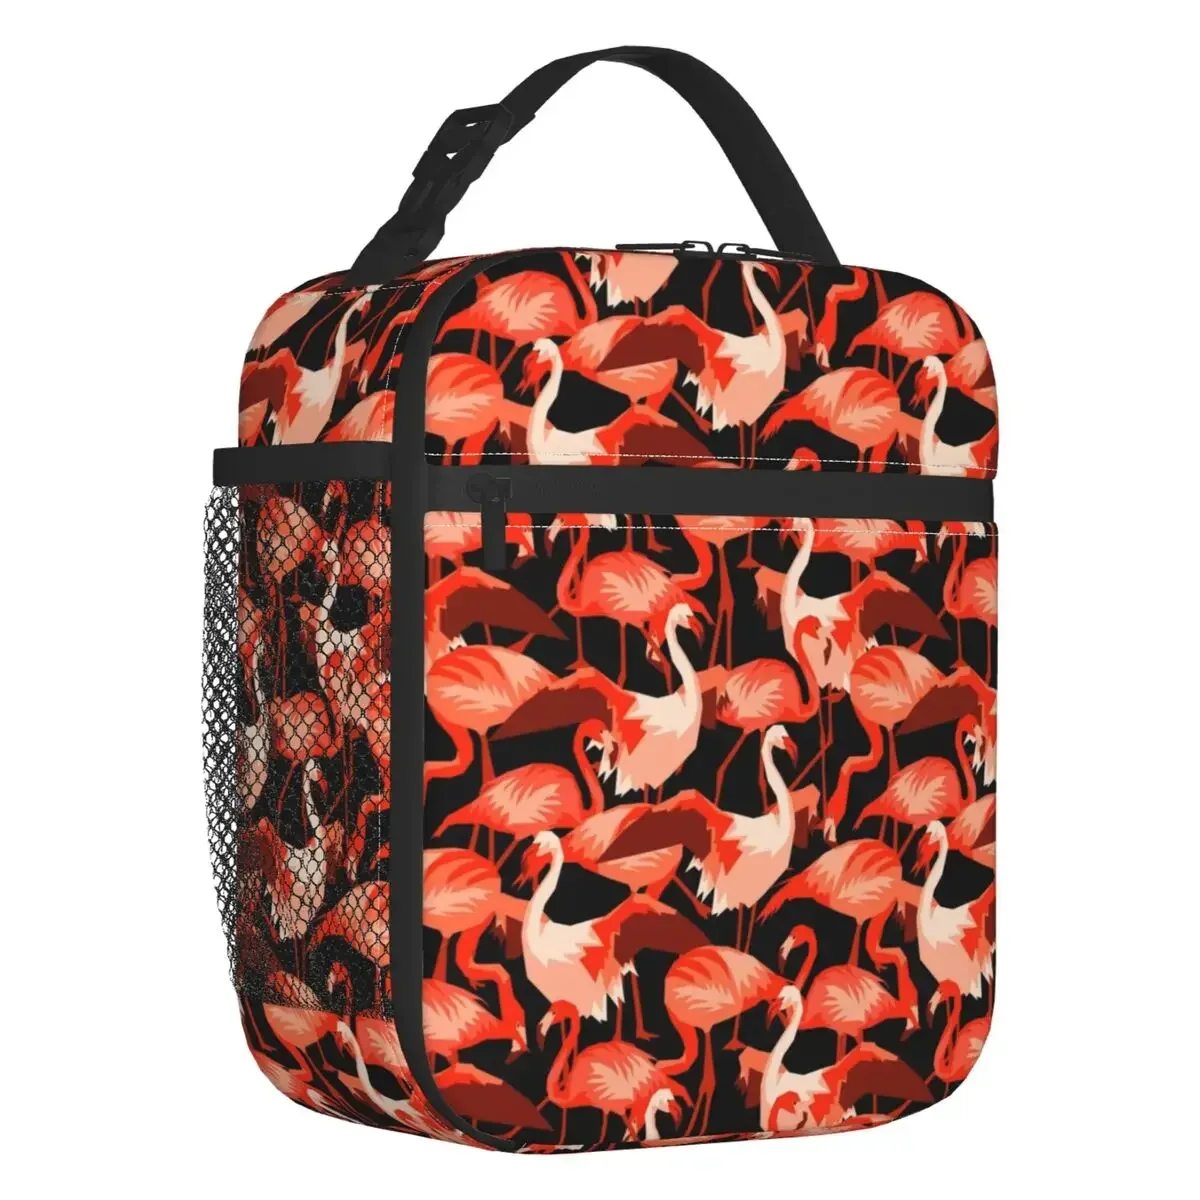 

Tropical Flamingo Pattern Portable Lunch Boxes Women Waterproof Cooler Thermal Food Insulated Lunch Bag School Children Student